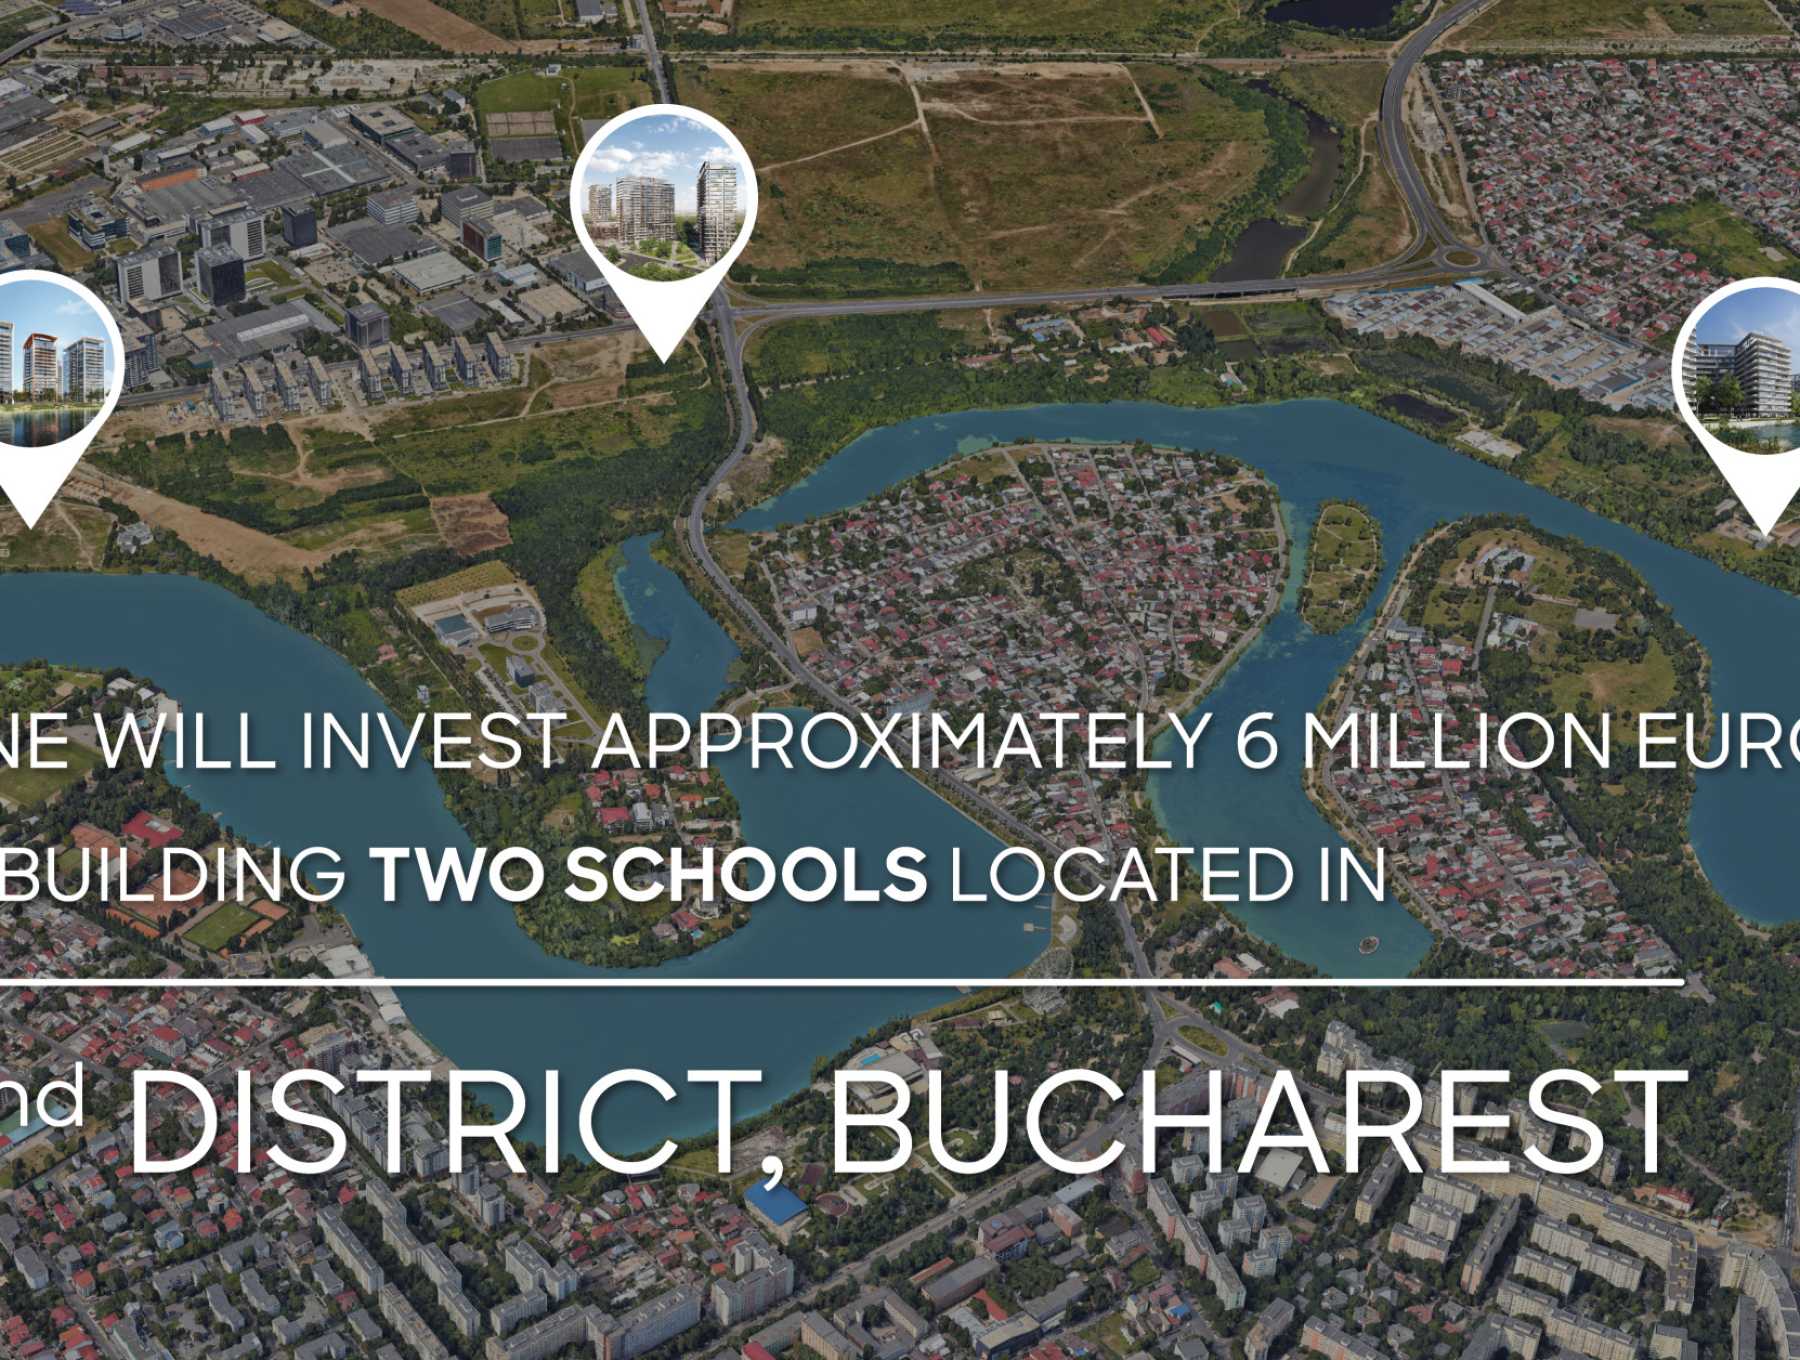 One United Properties is investing approximately 6 million euros in building two schools in sector 2 of Bucharest